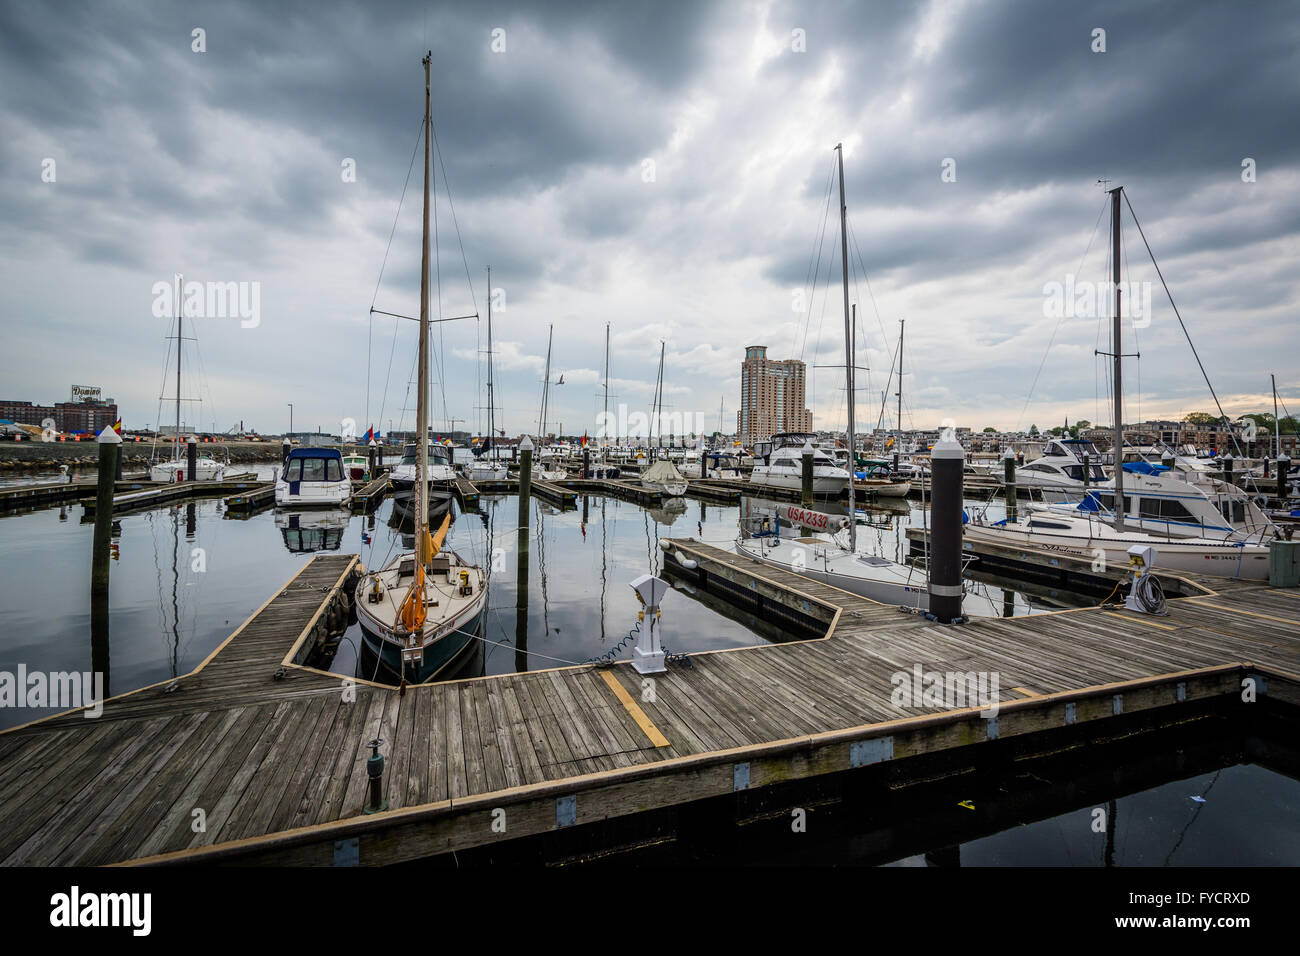 Storm clouds over docks and boats in Harbor East, Baltimore, Maryland. Stock Photo